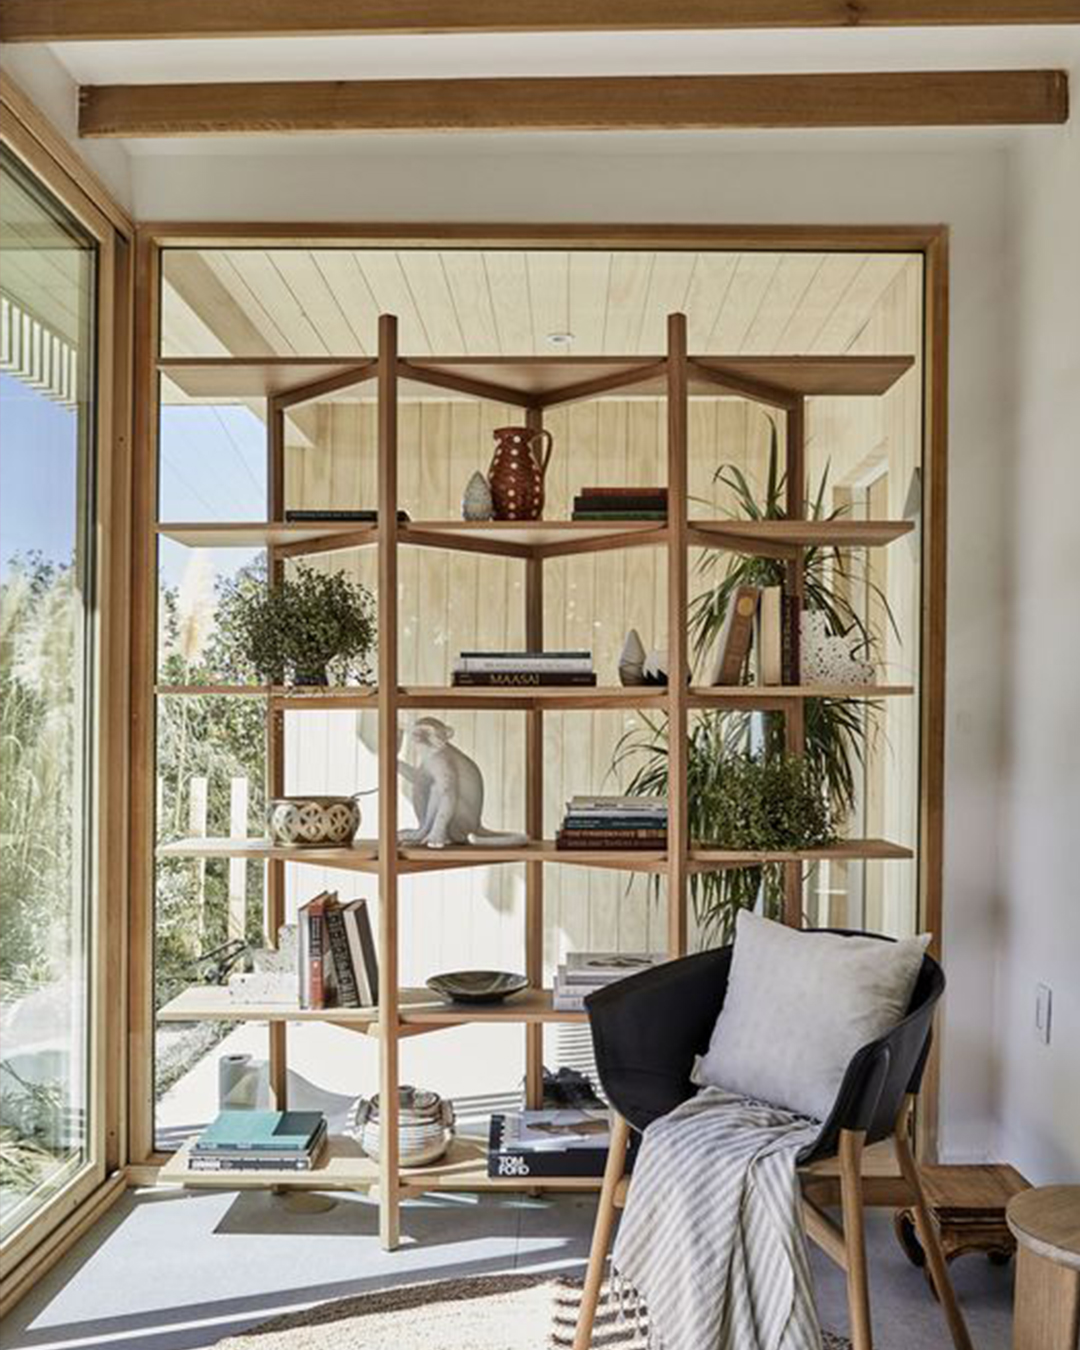 Japandi style home featuring shelving